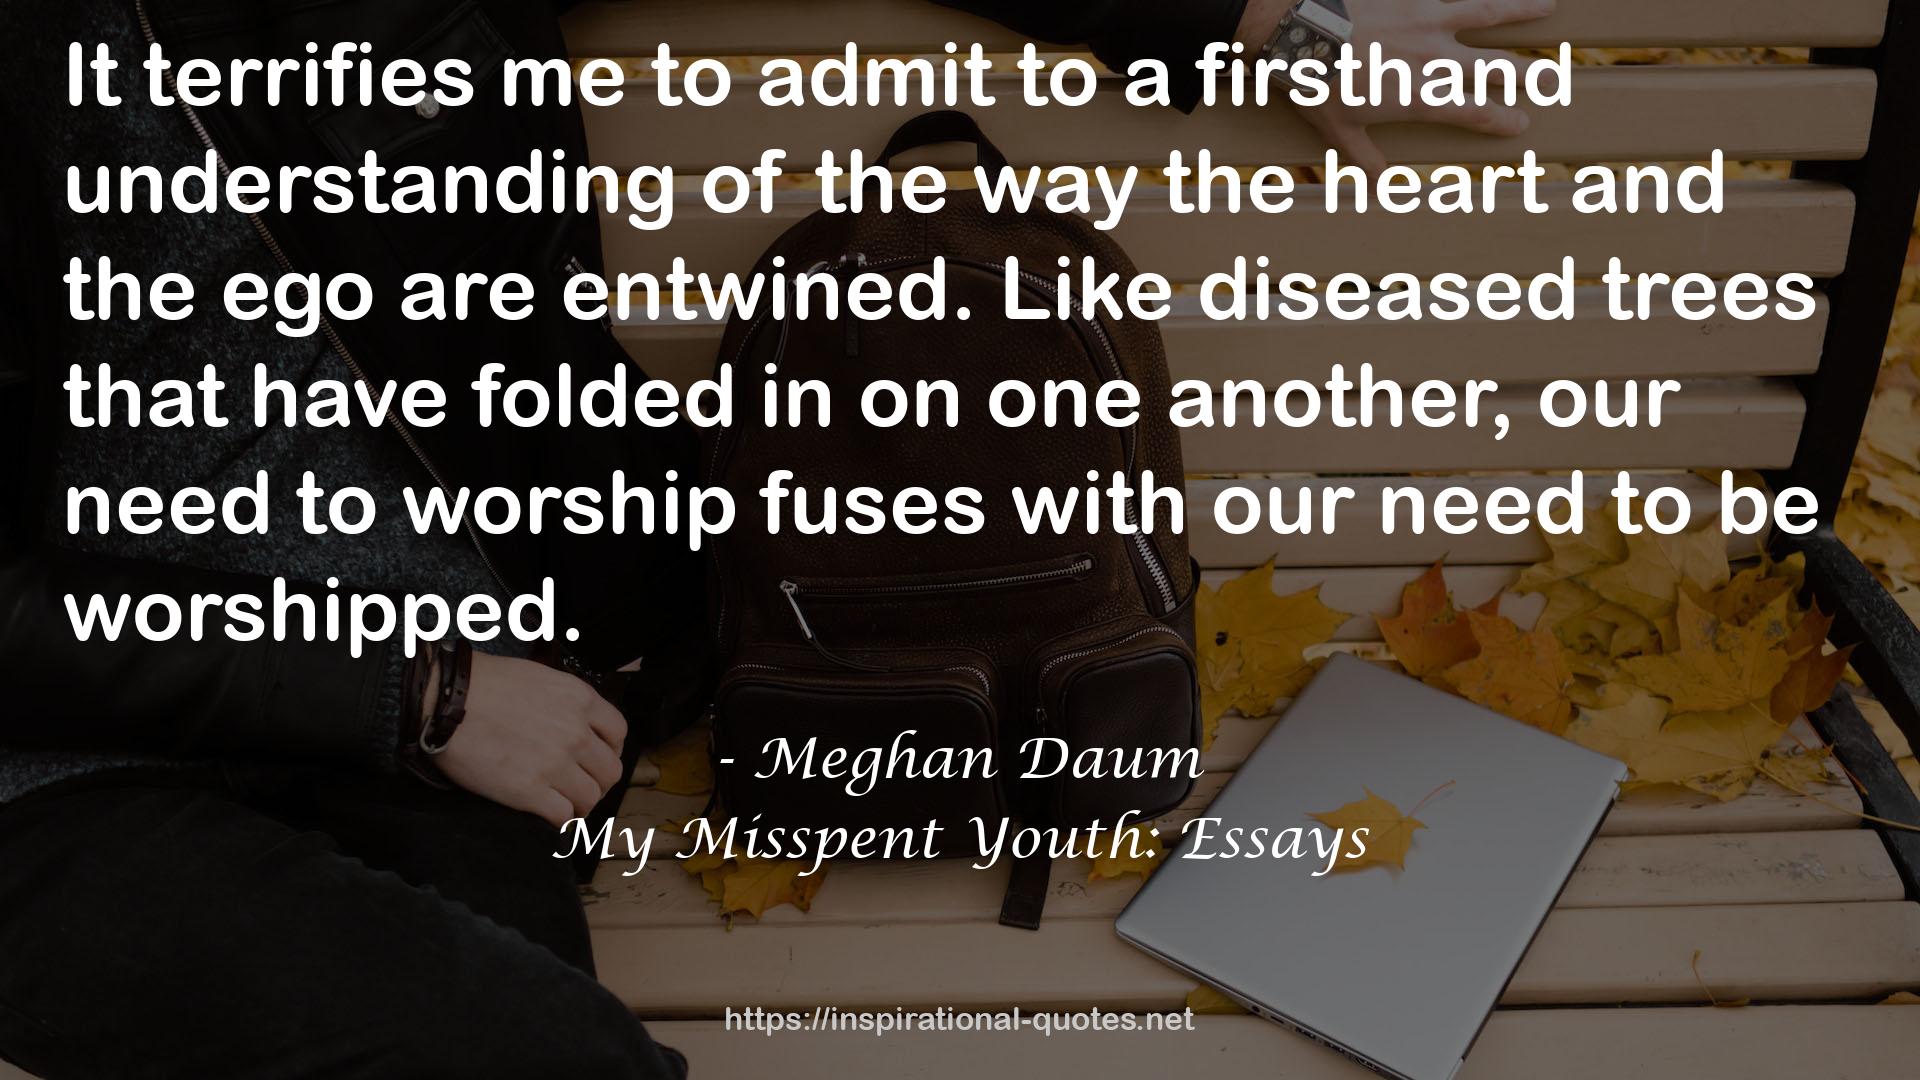 My Misspent Youth: Essays QUOTES